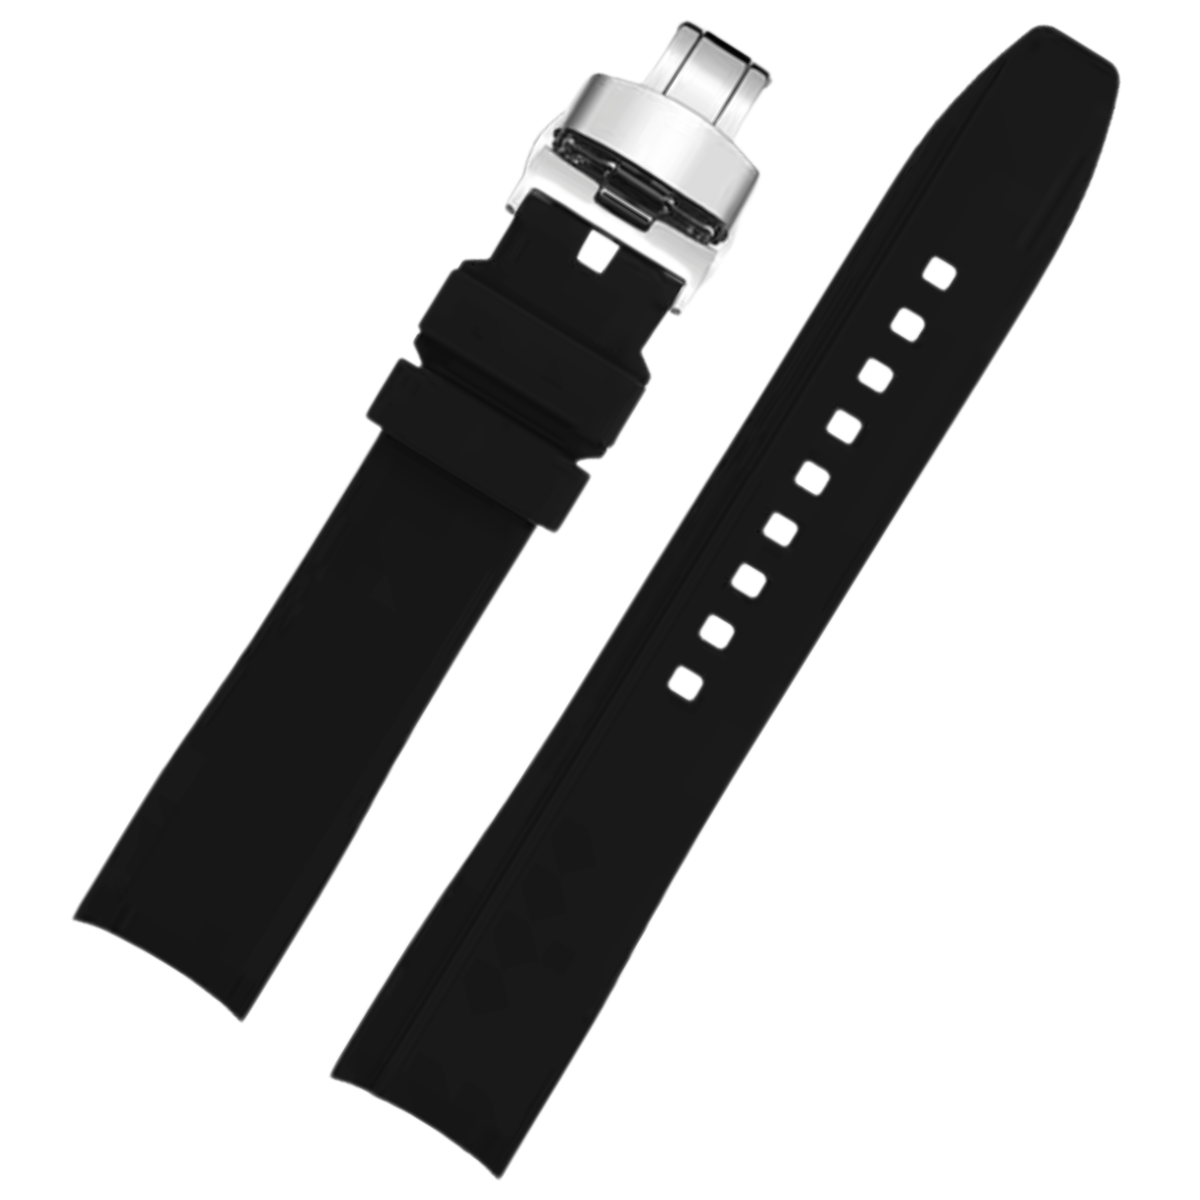 Dexter Silicone Curved Lug End Strap Black (Silver Deployment Clasp) (Rolex Replacement)